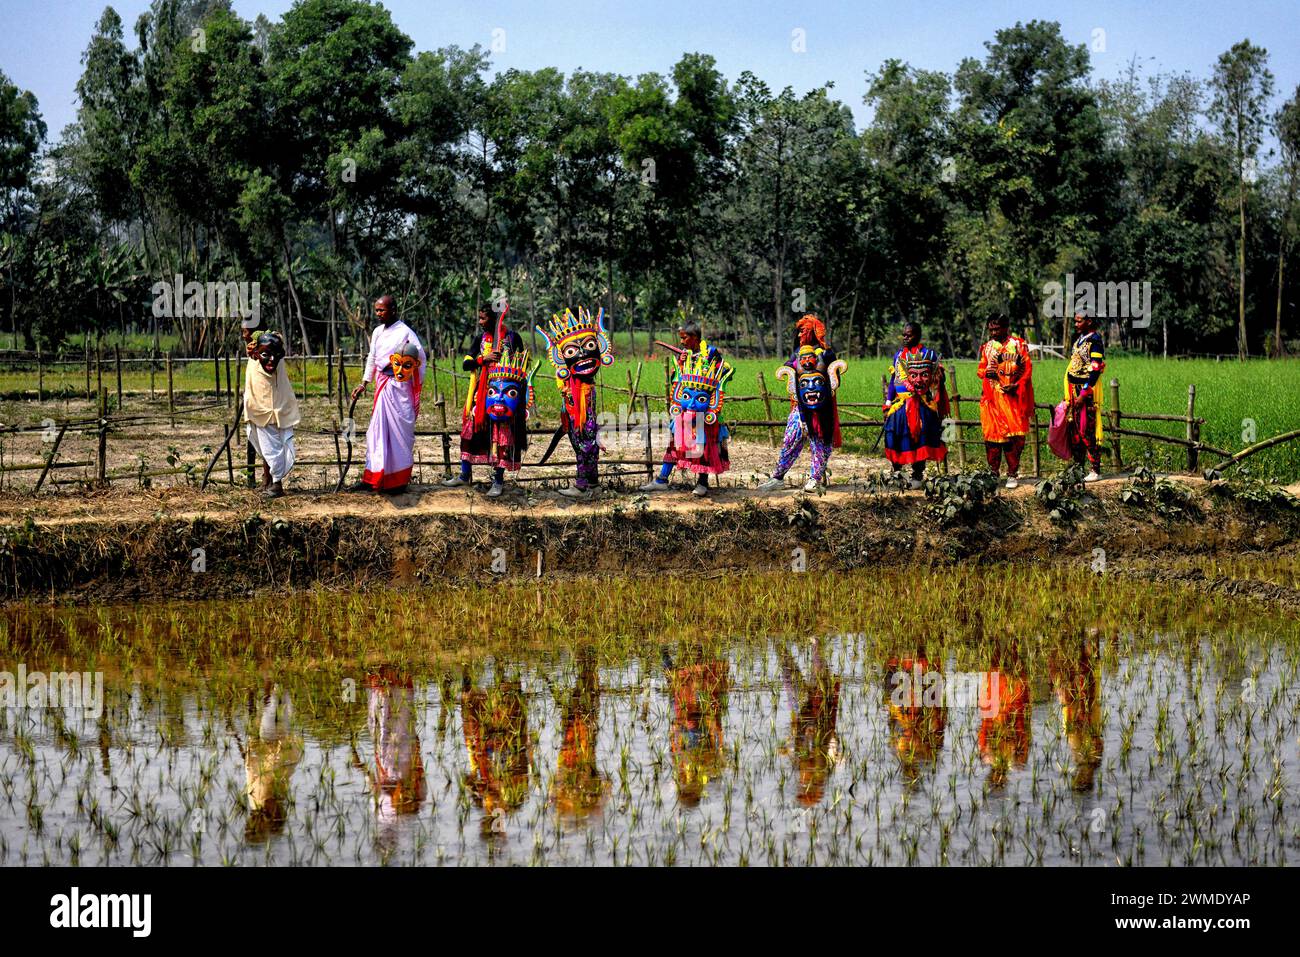 Masked dancers of Gomira dance troupe seen walking beside a water filled paddy field at a village near Raiganj. Gomira is a masked dance form. The word ‘Gomira' has been derived from the colloquial form of the word ‘Gram-Chandi' or the female deity who is the protective force of the village. The exact origin of the dance form is not traceable and the knowledge has been lost over time. Gomira dance is a rural dance form mainly practiced in the Dinajpur district of West Bengal. The Gomira dances are organized to appease the deity to usher in the 'good forces' and drive out the 'evil forces'. It Stock Photo